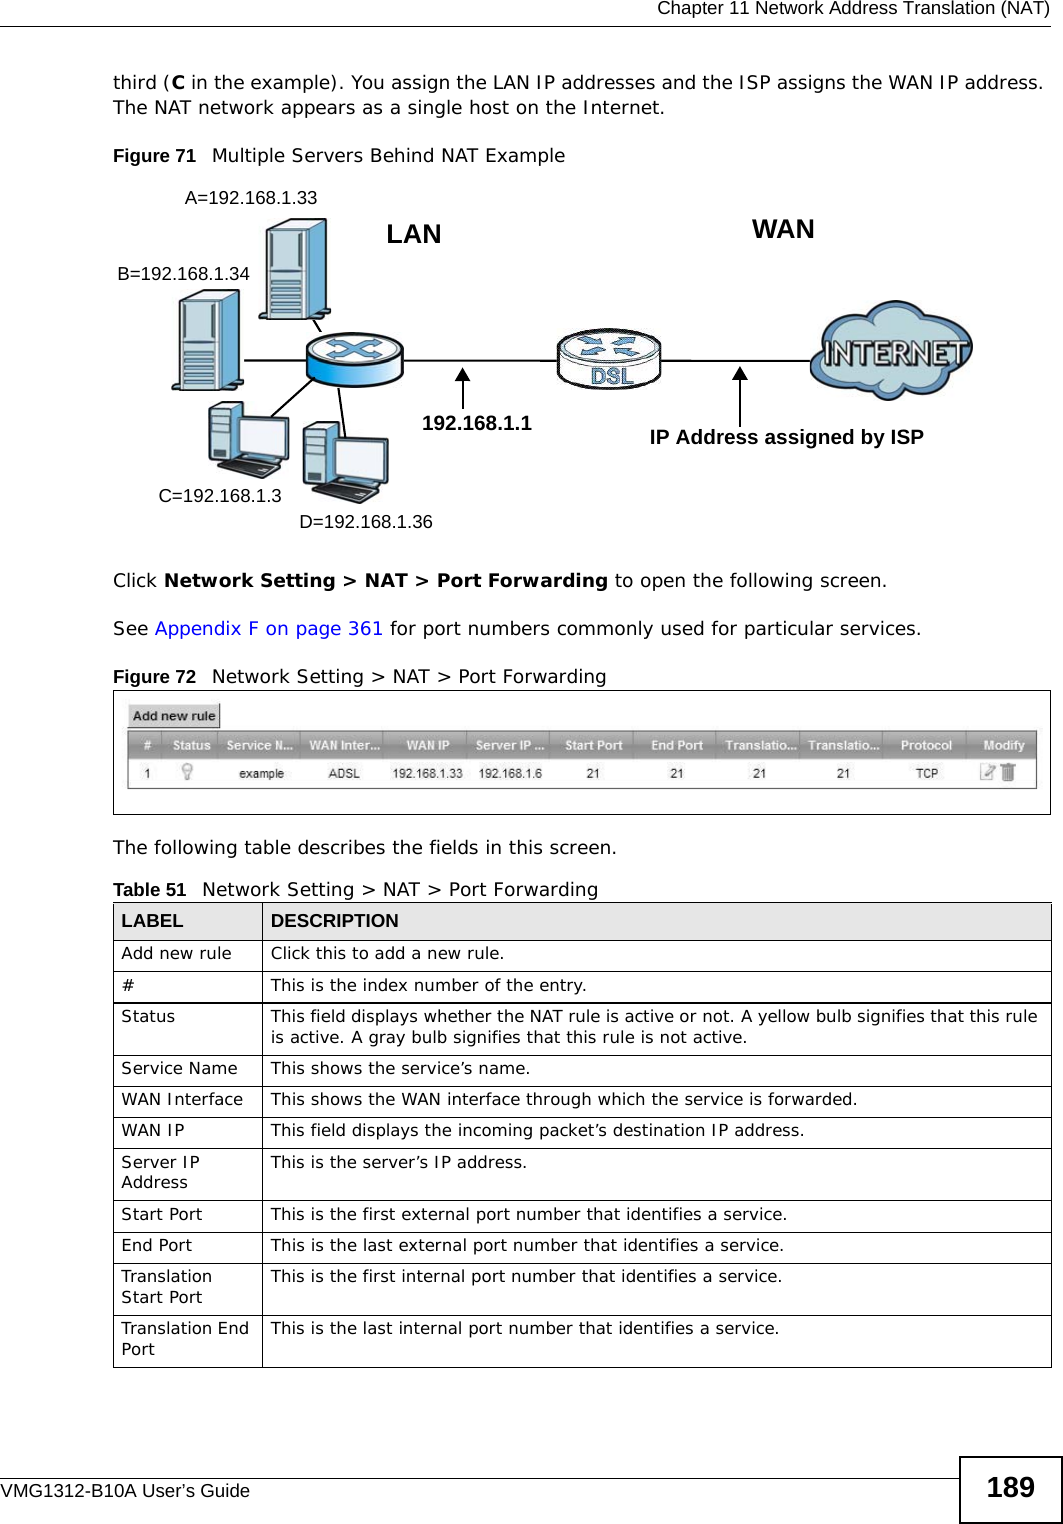  Chapter 11 Network Address Translation (NAT)VMG1312-B10A User’s Guide 189third (C in the example). You assign the LAN IP addresses and the ISP assigns the WAN IP address. The NAT network appears as a single host on the Internet.Figure 71   Multiple Servers Behind NAT ExampleClick Network Setting &gt; NAT &gt; Port Forwarding to open the following screen.See Appendix F on page 361 for port numbers commonly used for particular services. Figure 72   Network Setting &gt; NAT &gt; Port ForwardingThe following table describes the fields in this screen. Table 51   Network Setting &gt; NAT &gt; Port ForwardingLABEL DESCRIPTIONAdd new rule Click this to add a new rule.#This is the index number of the entry.Status This field displays whether the NAT rule is active or not. A yellow bulb signifies that this rule is active. A gray bulb signifies that this rule is not active.Service Name This shows the service’s name.WAN Interface This shows the WAN interface through which the service is forwarded.WAN IP This field displays the incoming packet’s destination IP address.Server IP Address This is the server’s IP address.Start Port  This is the first external port number that identifies a service.End Port  This is the last external port number that identifies a service.Translation Start Port  This is the first internal port number that identifies a service.Translation End Port  This is the last internal port number that identifies a service.A=192.168.1.33D=192.168.1.36C=192.168.1.3B=192.168.1.34WANLAN192.168.1.1 IP Address assigned by ISP